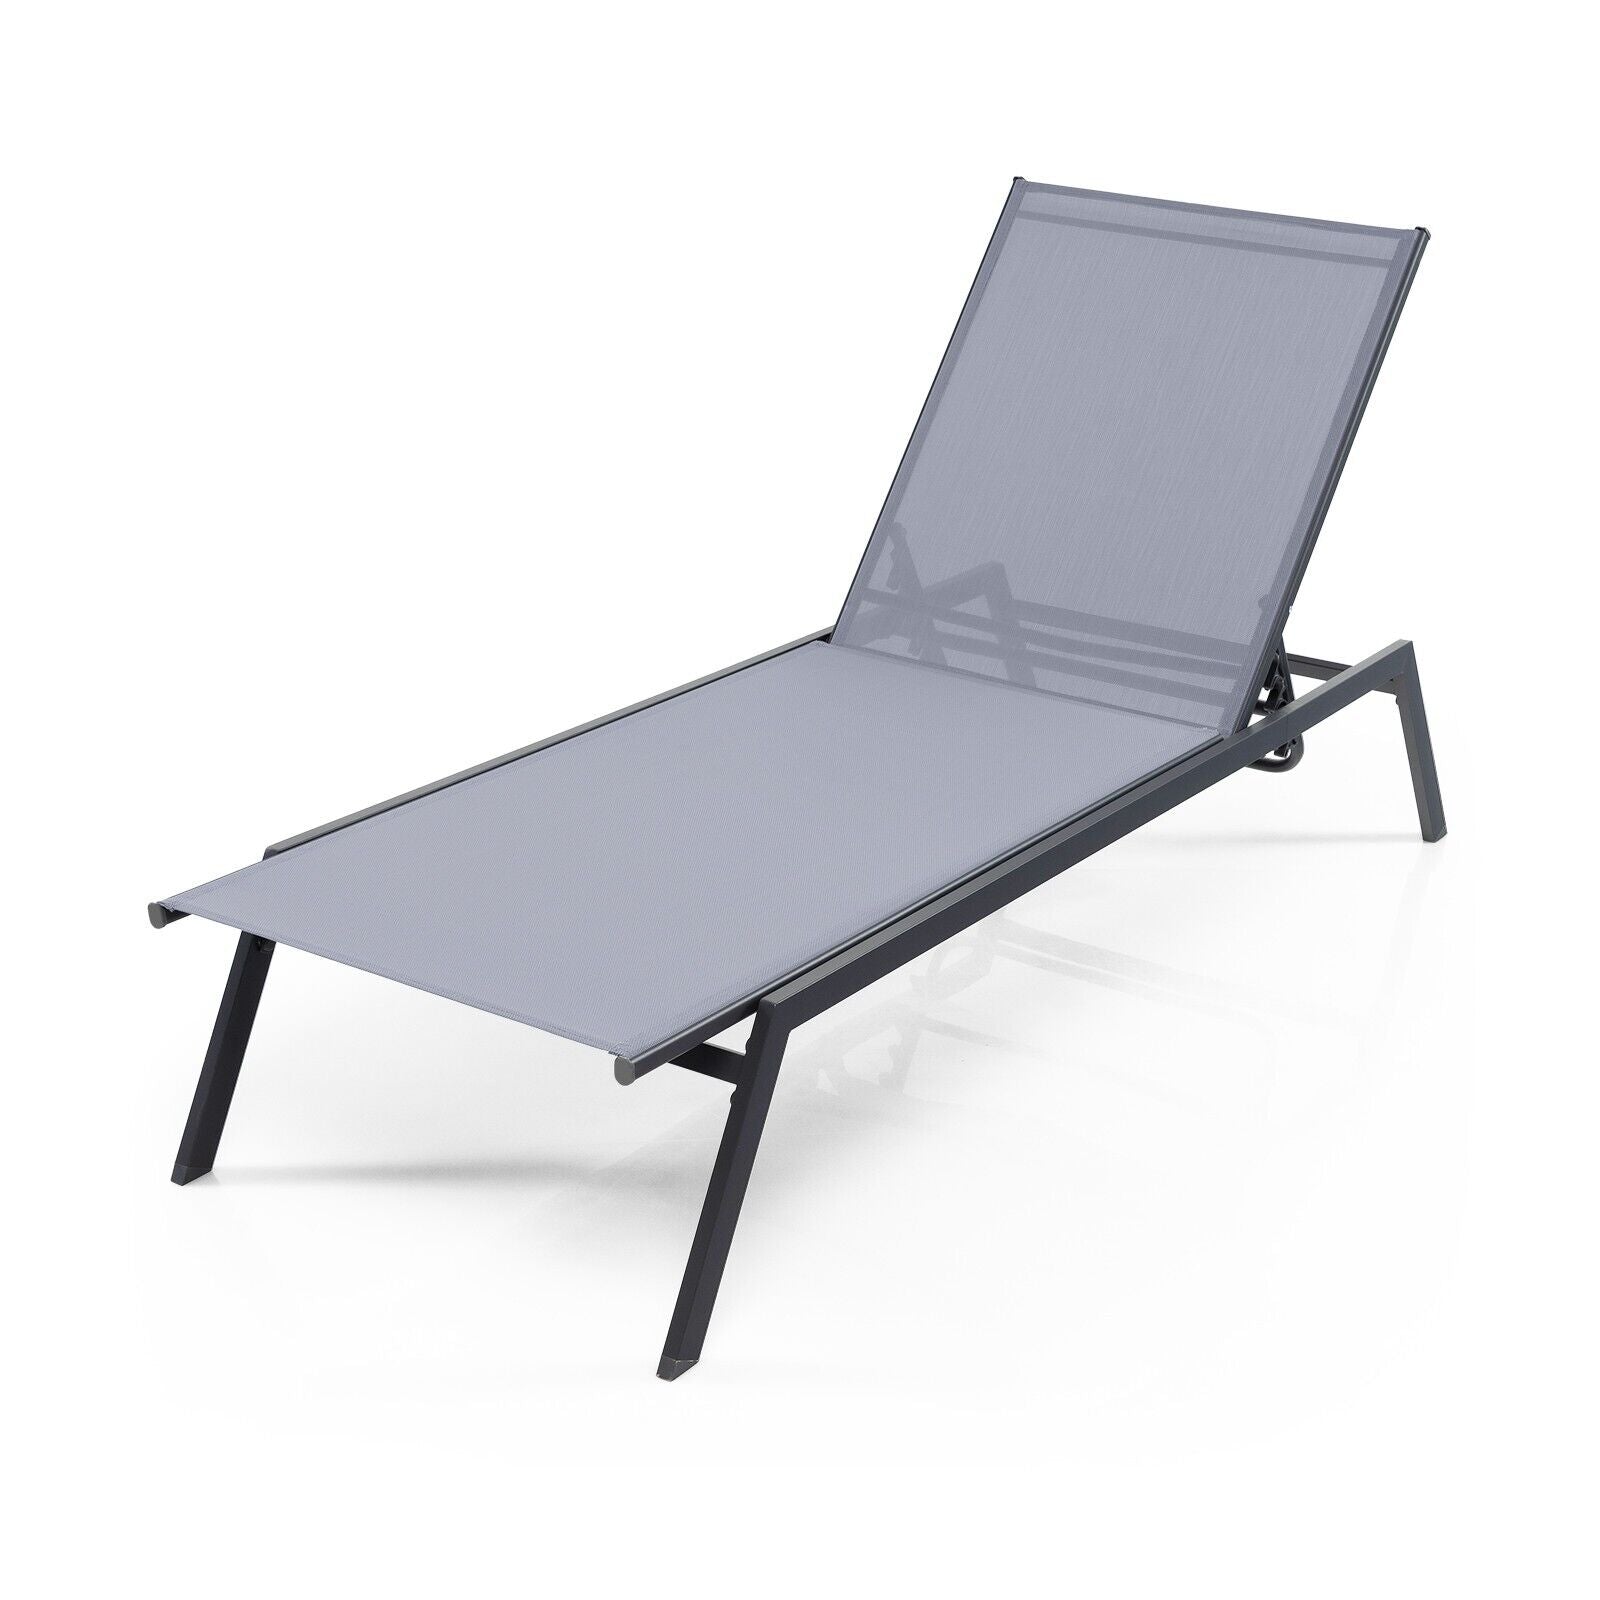 Outdoor Adjustable 6-Position Lounge Chair with Quick-Drying Fabric